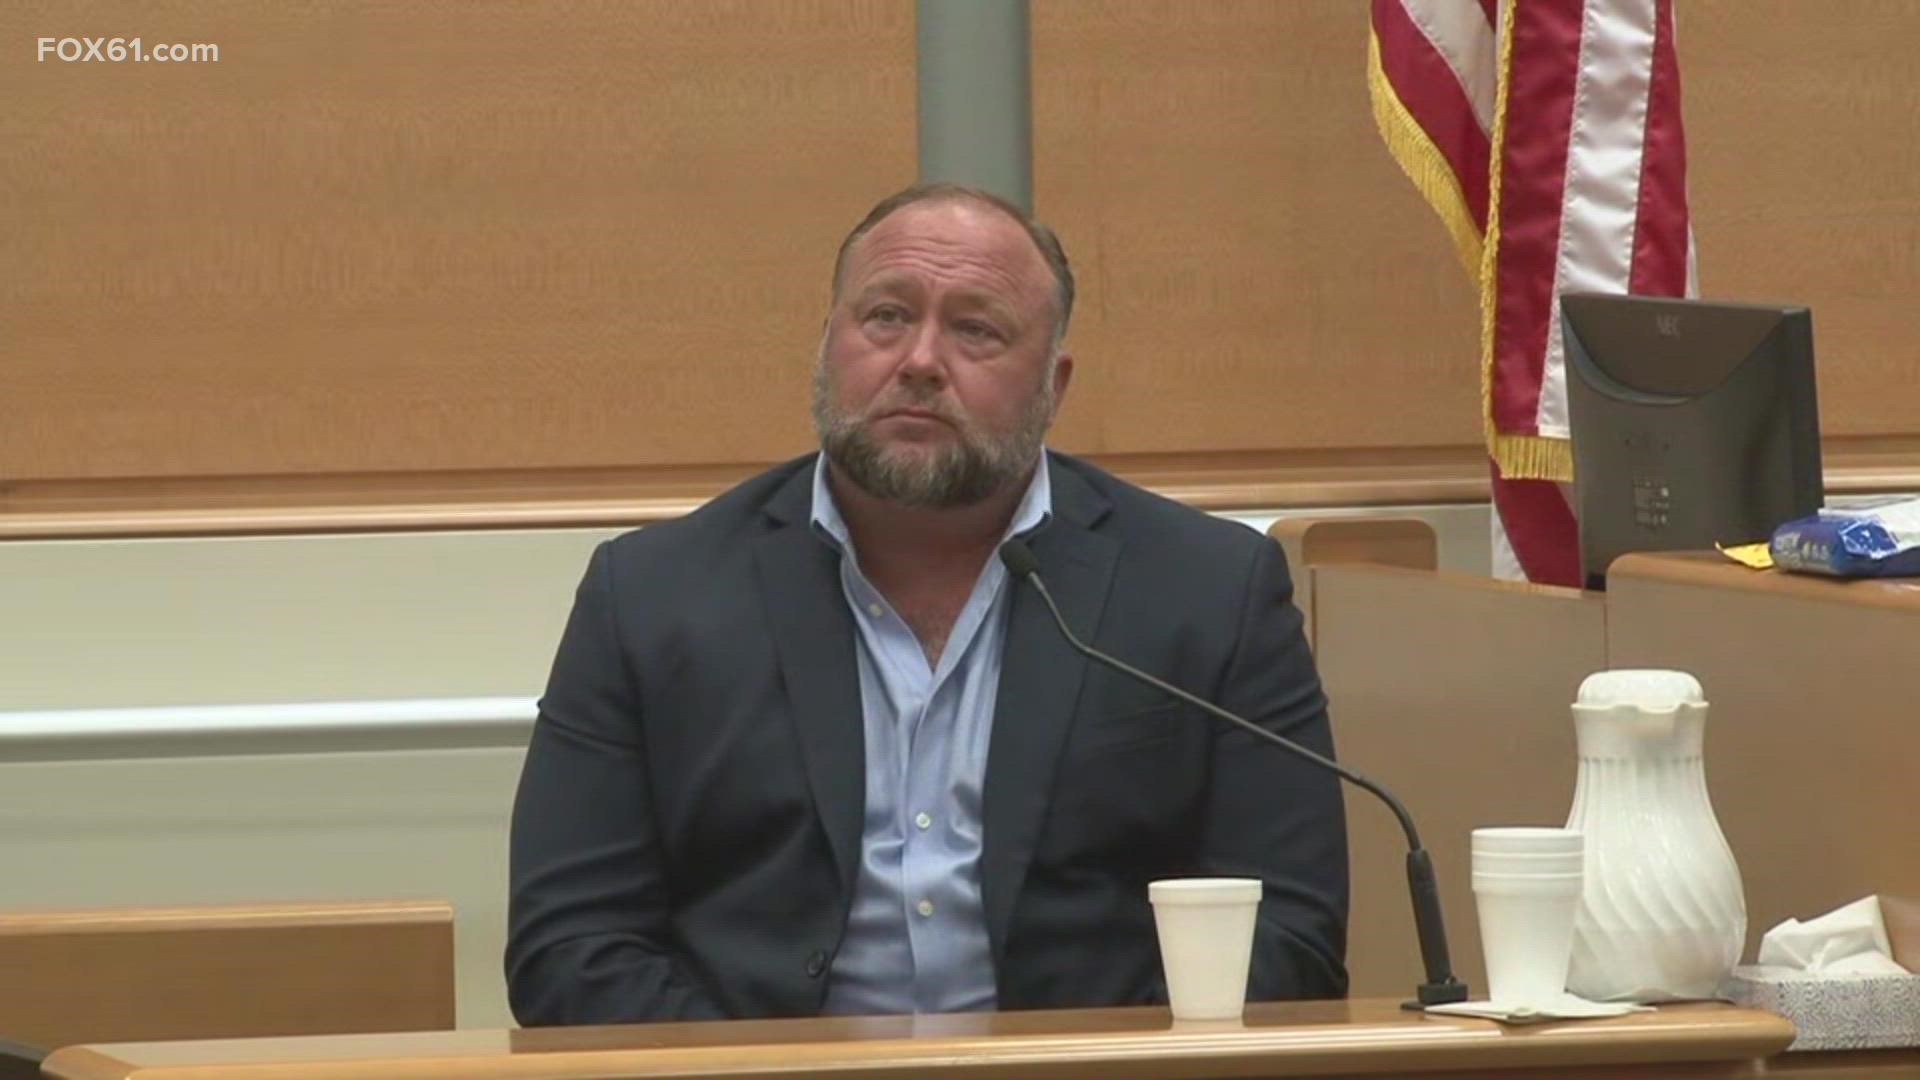 Alex Jones takes the stand on the 7th day of his defamation trial in Connecticut. Sandy Hook families seek damages from him for his claims the shooting was a hoax.